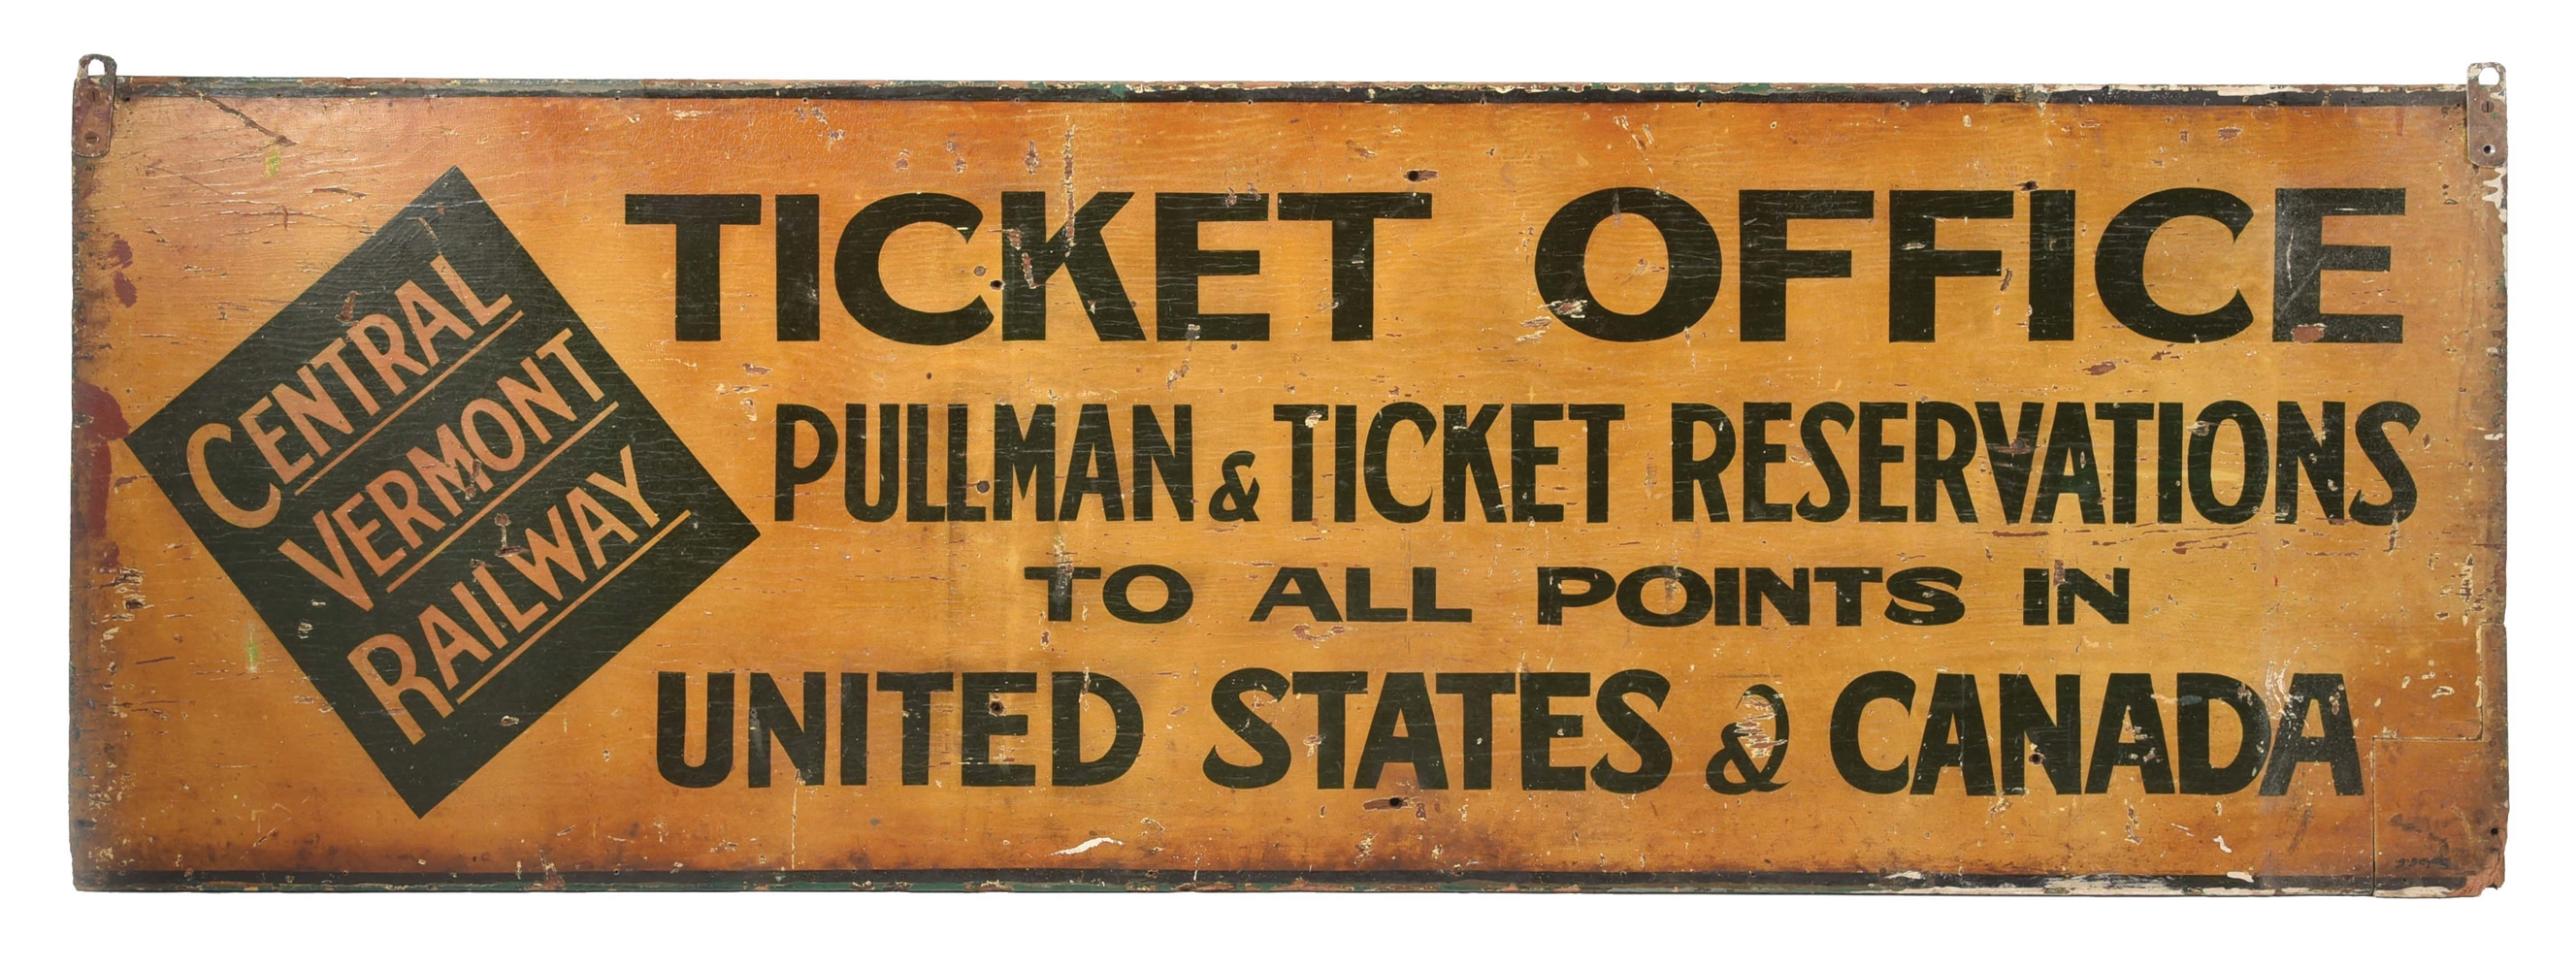 CENTRAL VERMONT RAILWAY TICKET OFFICE WOODEN RAILROAD STATION SIGN.